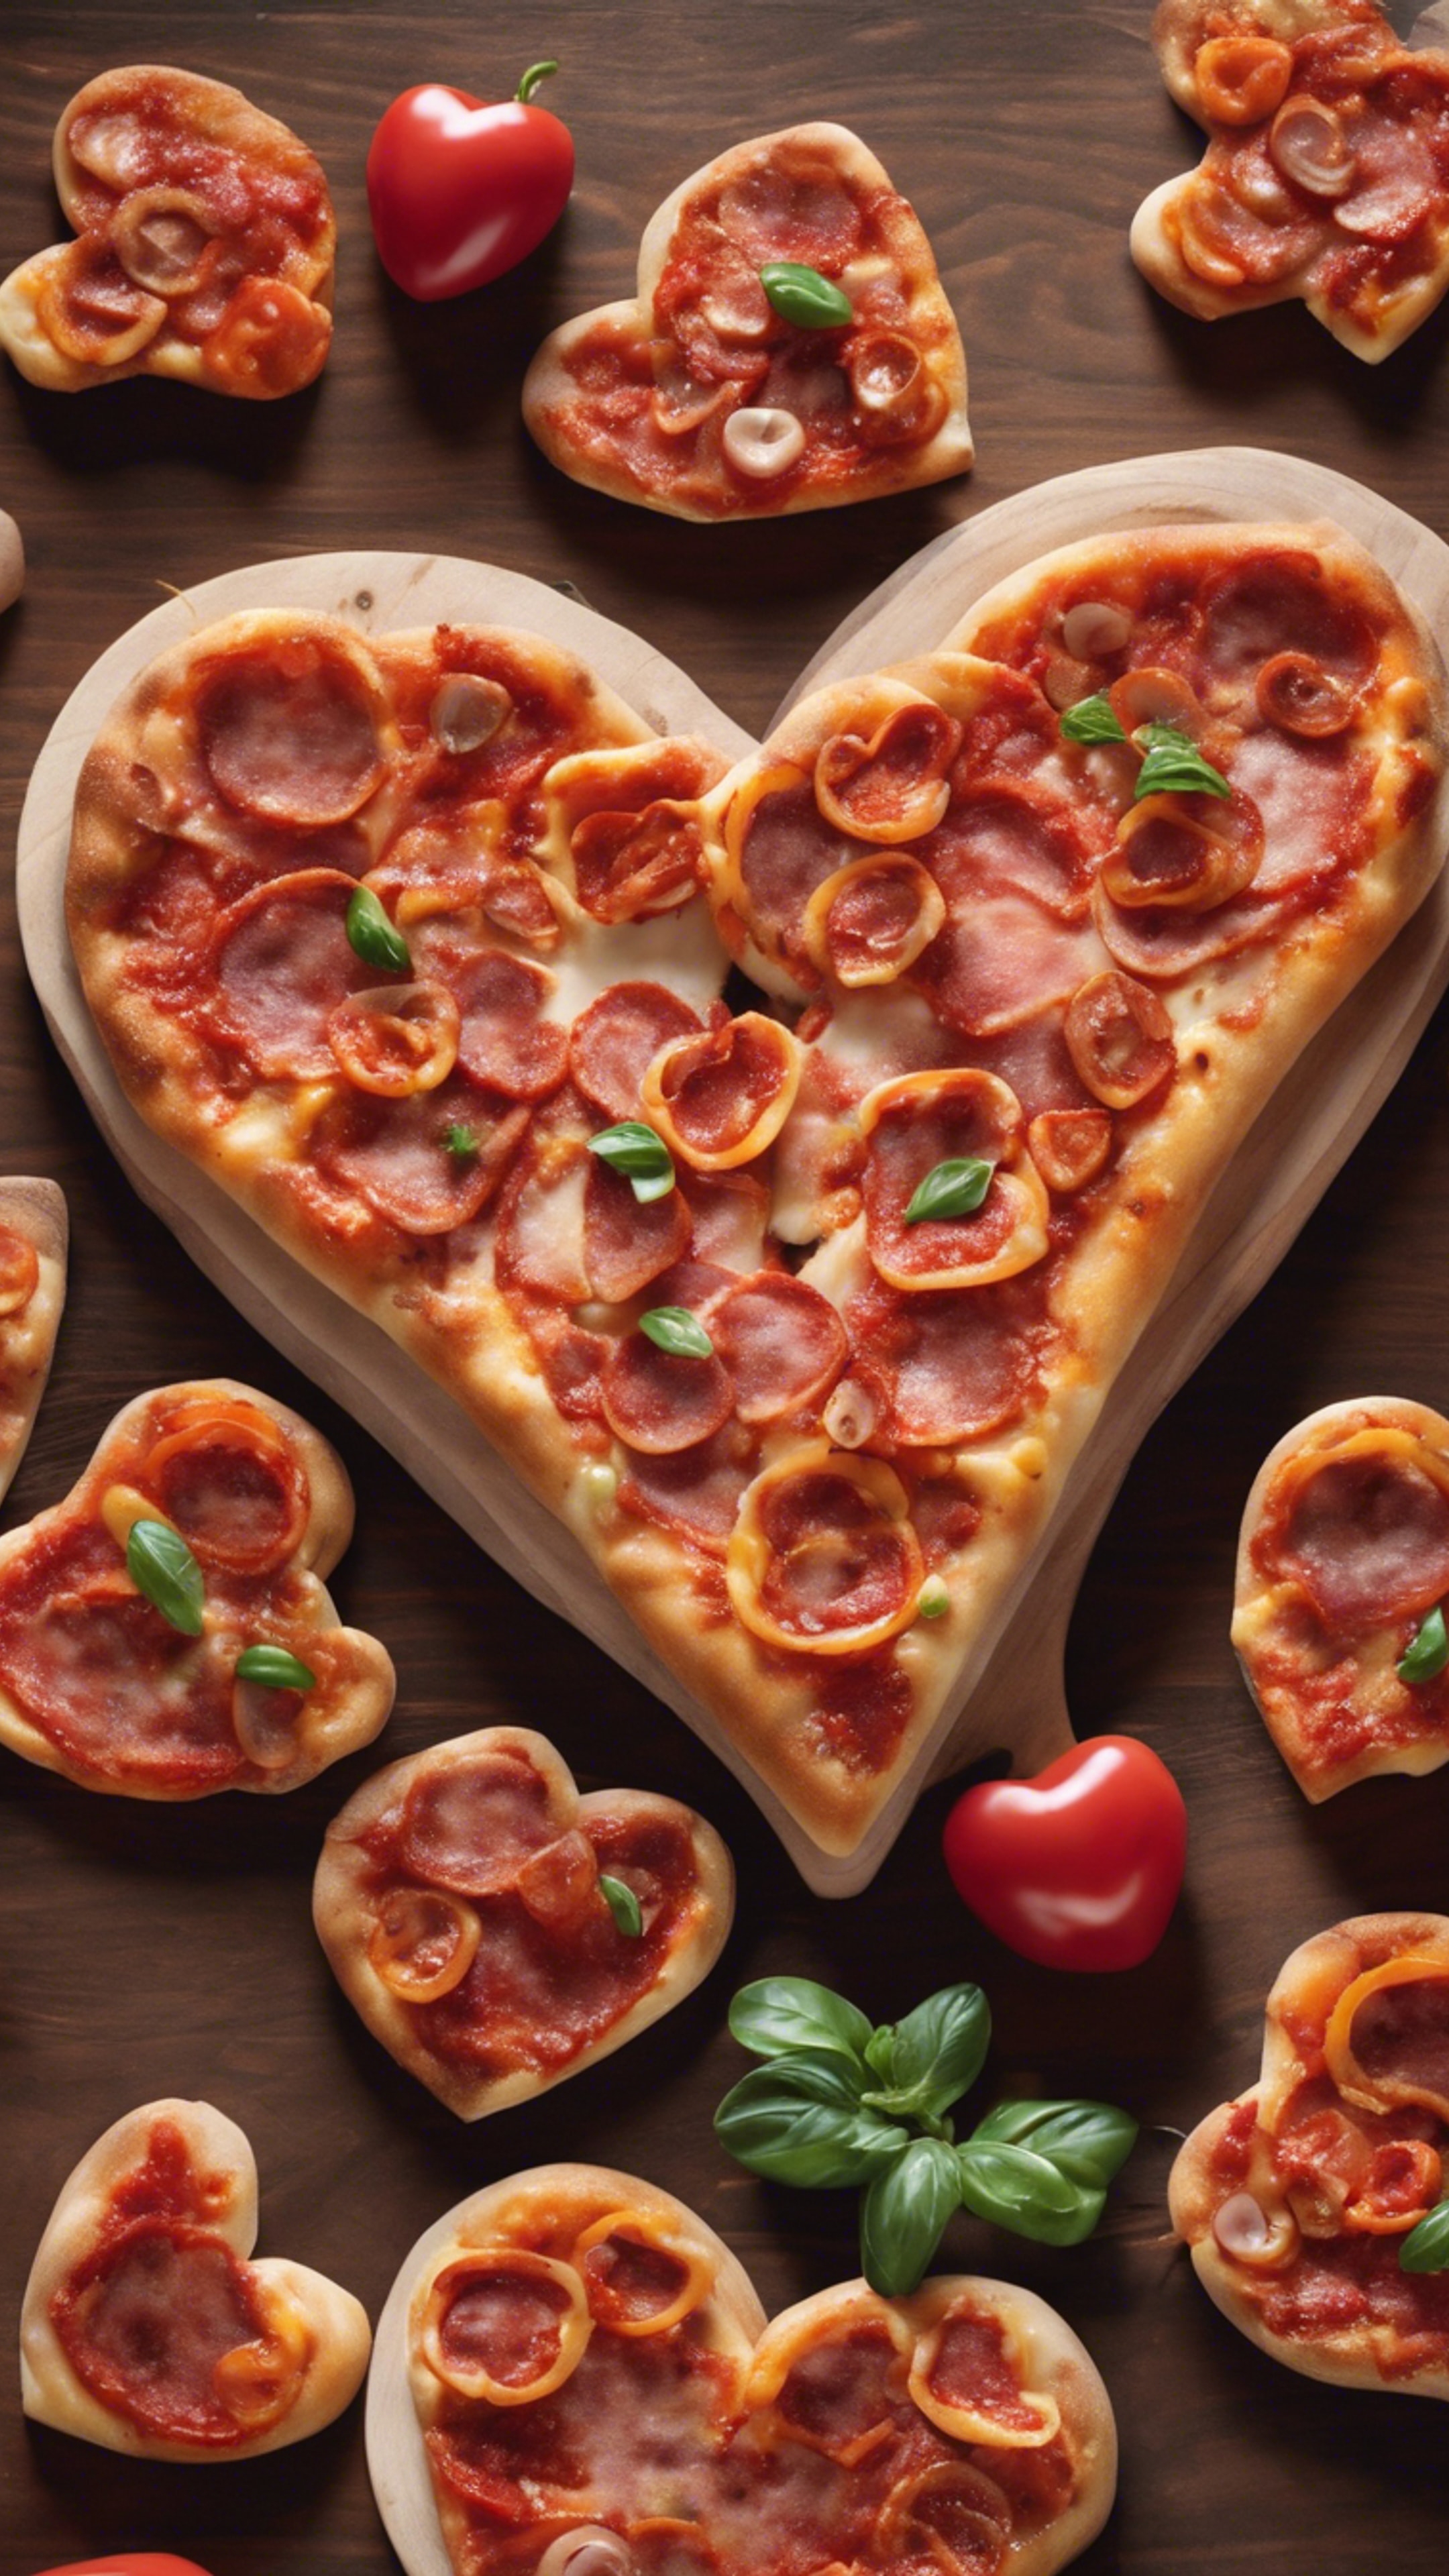 A heart-shaped pizza topped with pepperonis arranged in a smaller heart shape, the perfect cuisine for a romantic date. Tapet[15df62b77c2f46a18143]